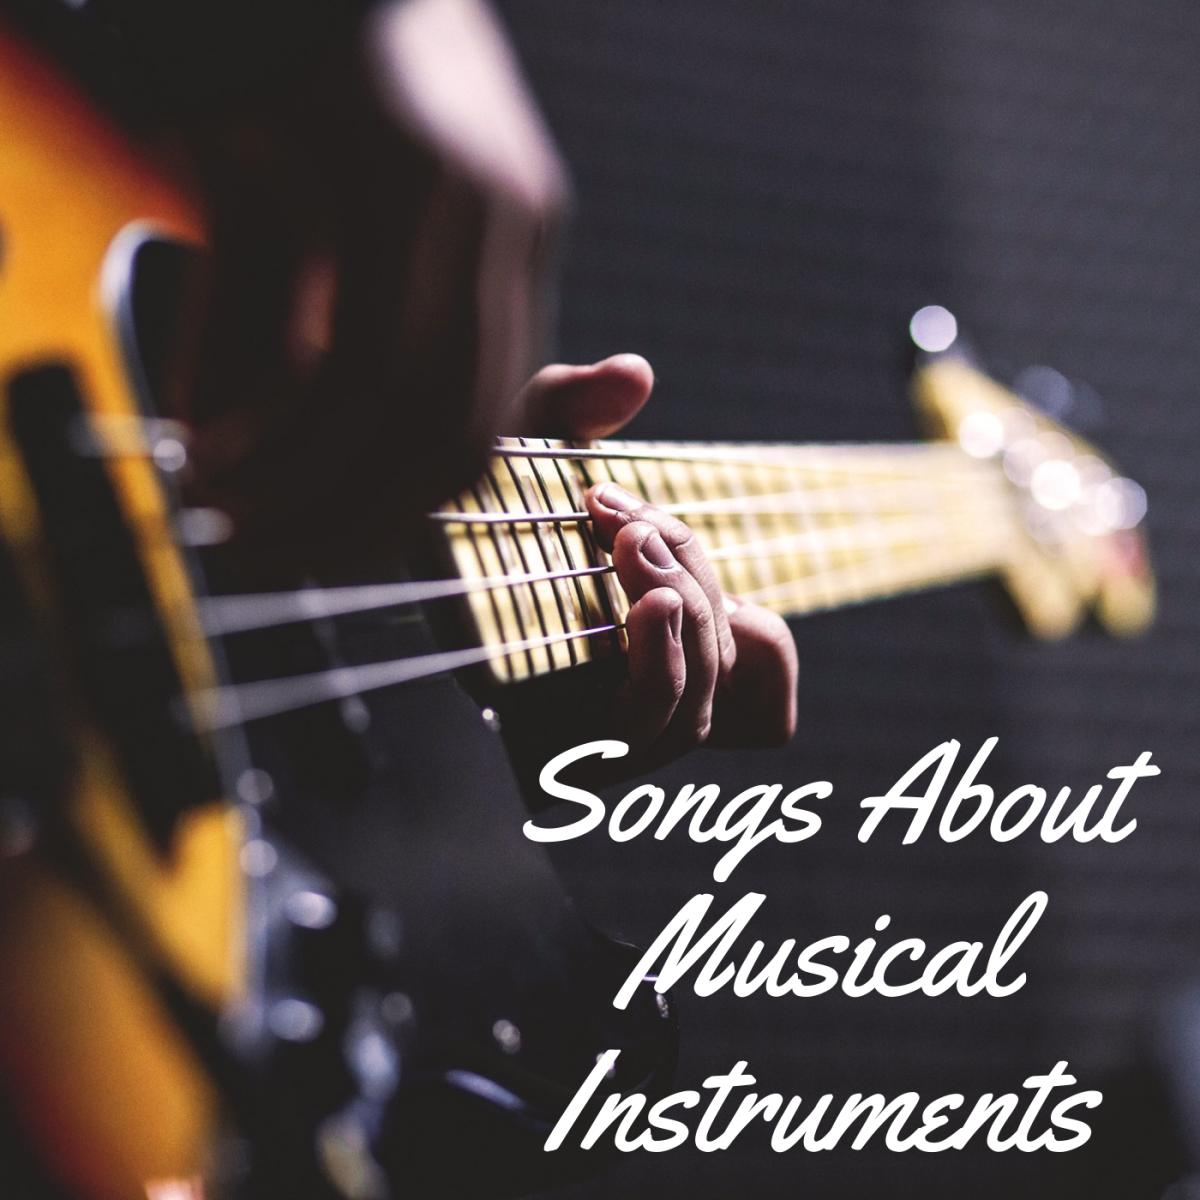 48 Songs About Musical Instruments